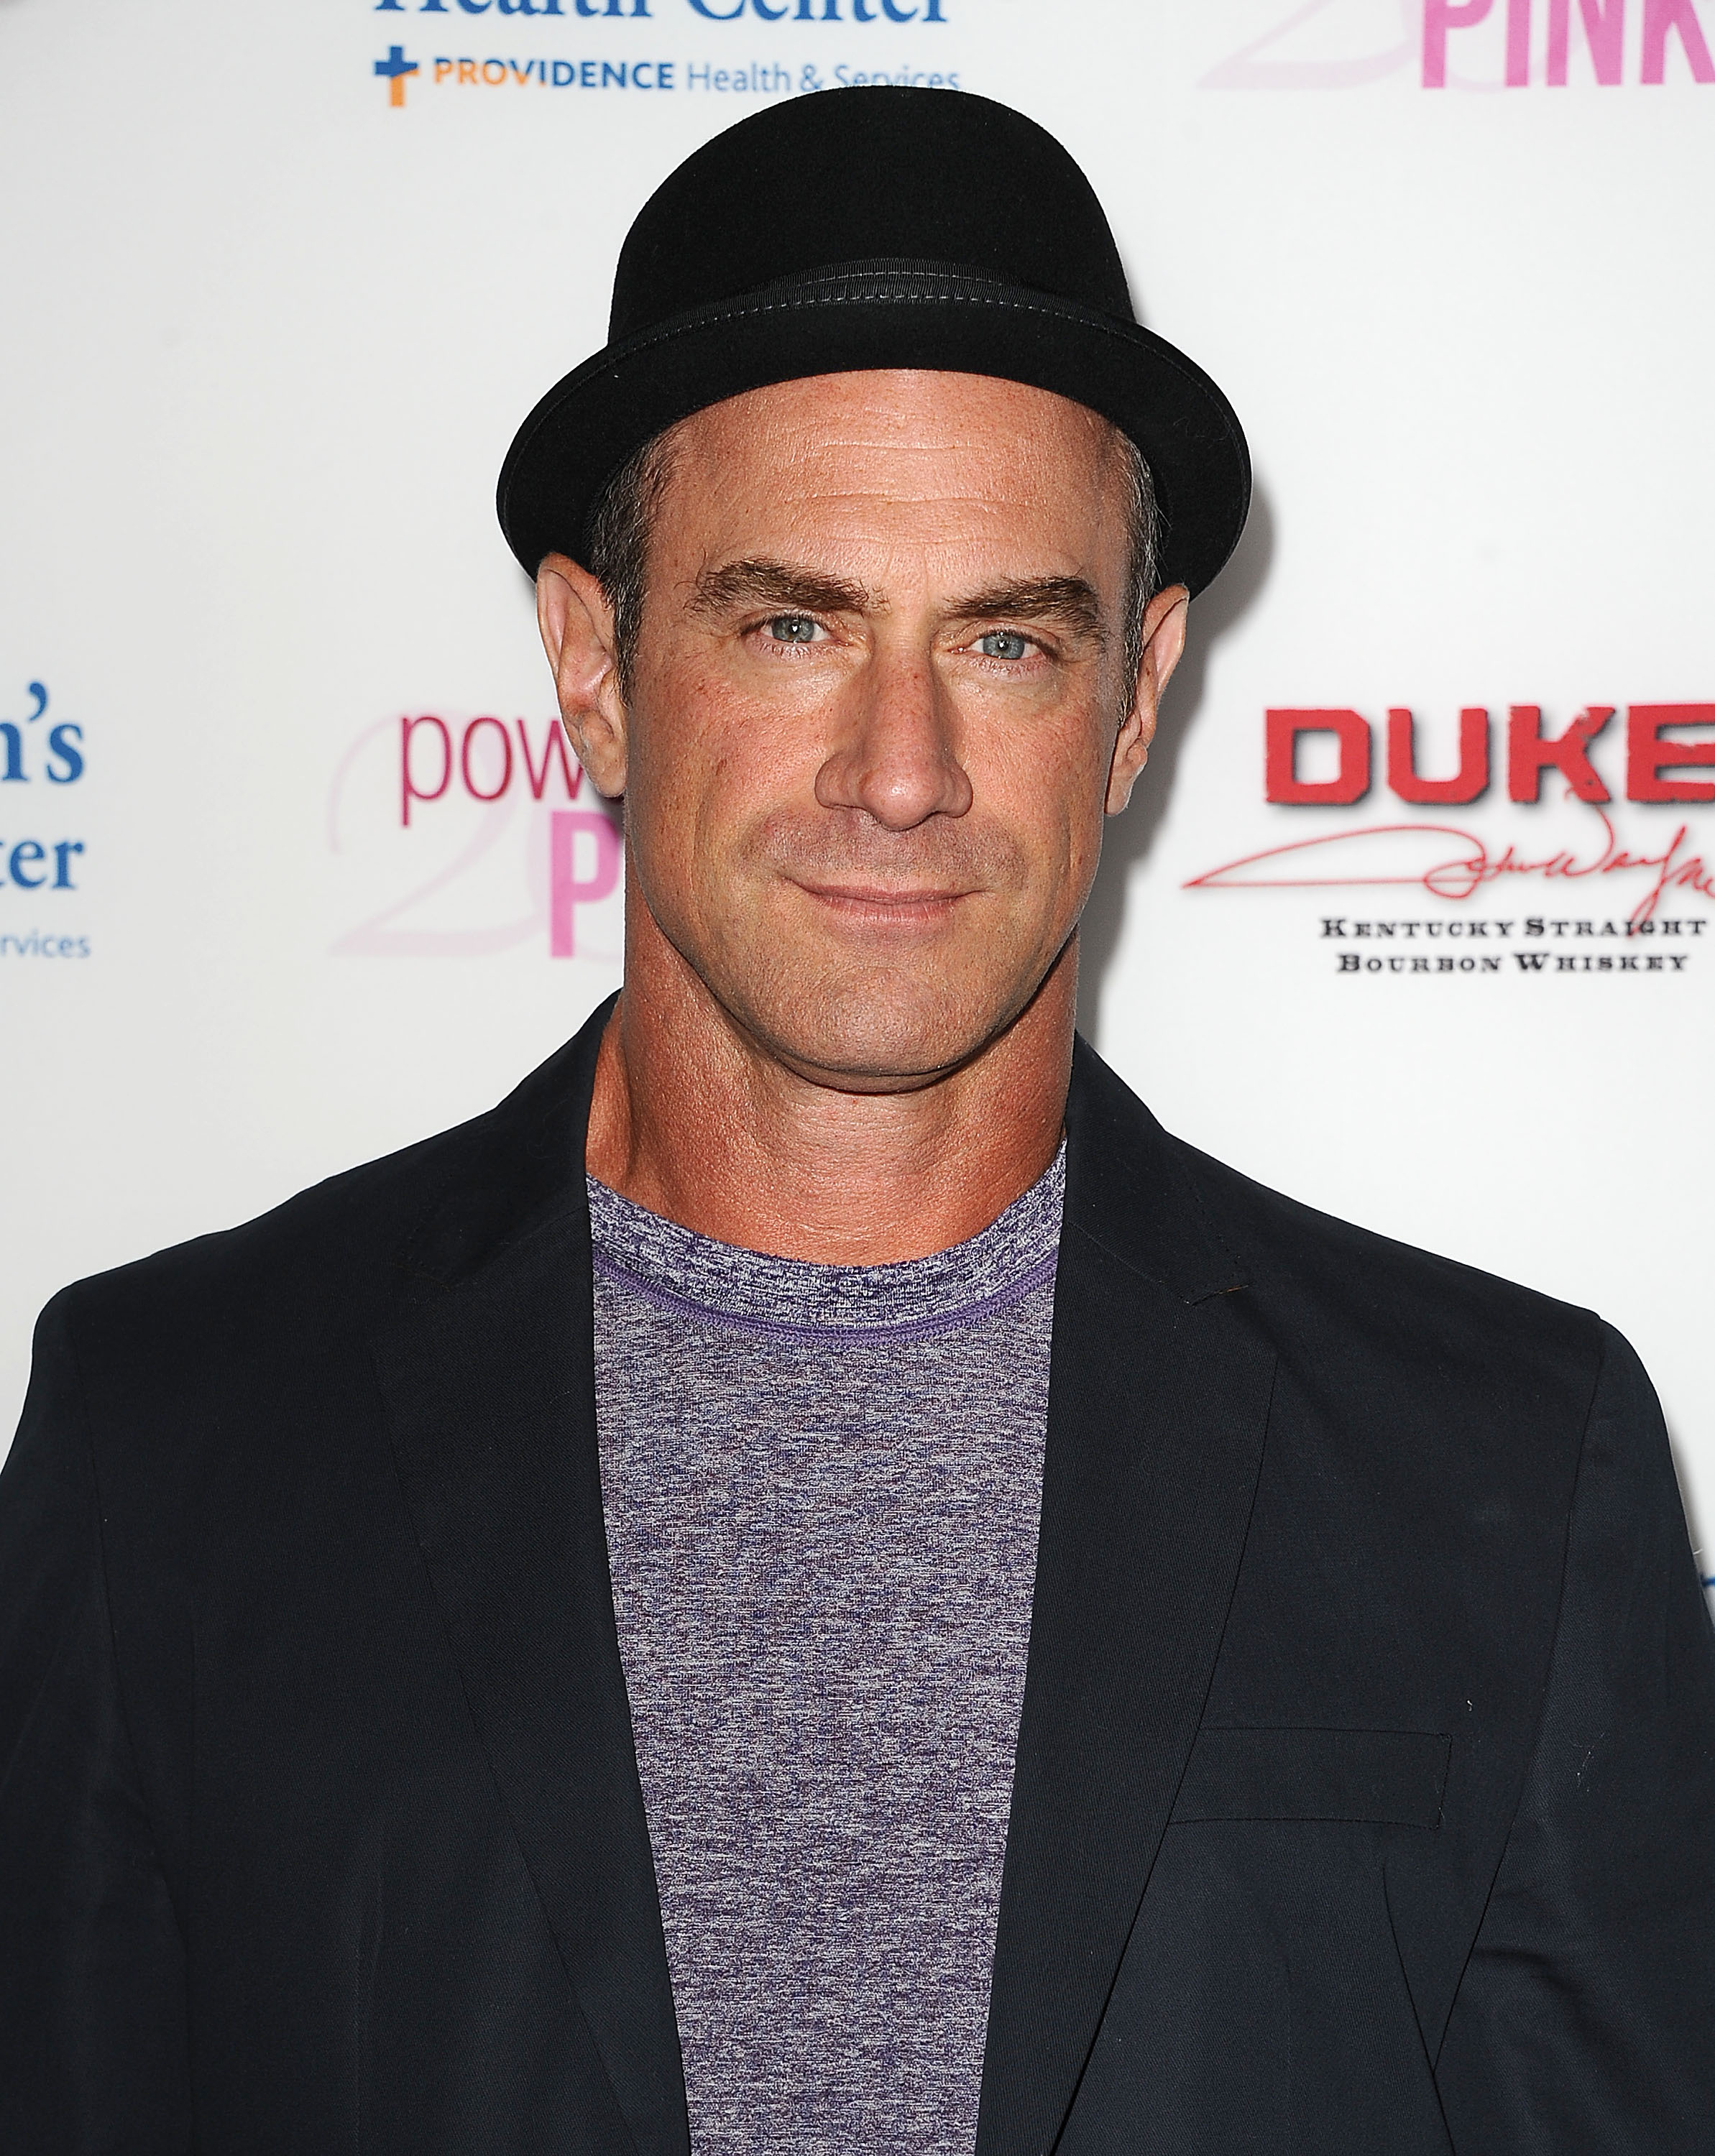 Christopher Meloni attends the 2014 Power of Pink in West Hollywood, California on October 23, 2014. (Jason LaVeris--FilmMagic)